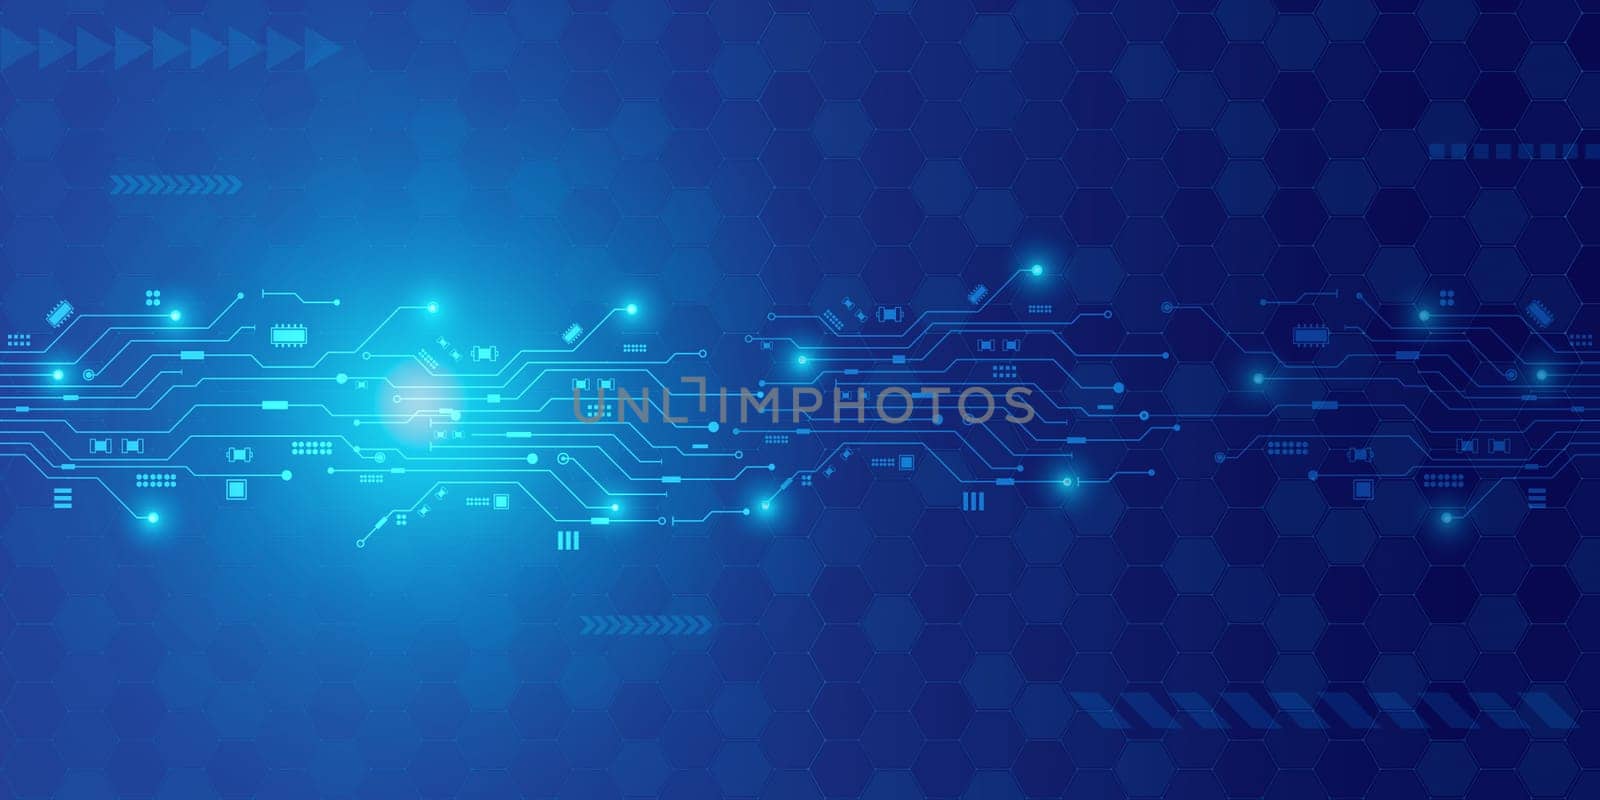 Futuristic blue and abstract technology background, Data transfer on dark blue abstract cyberspace background, Digital technology, internet network connection, big data, digital marketing.  by Unimages2527